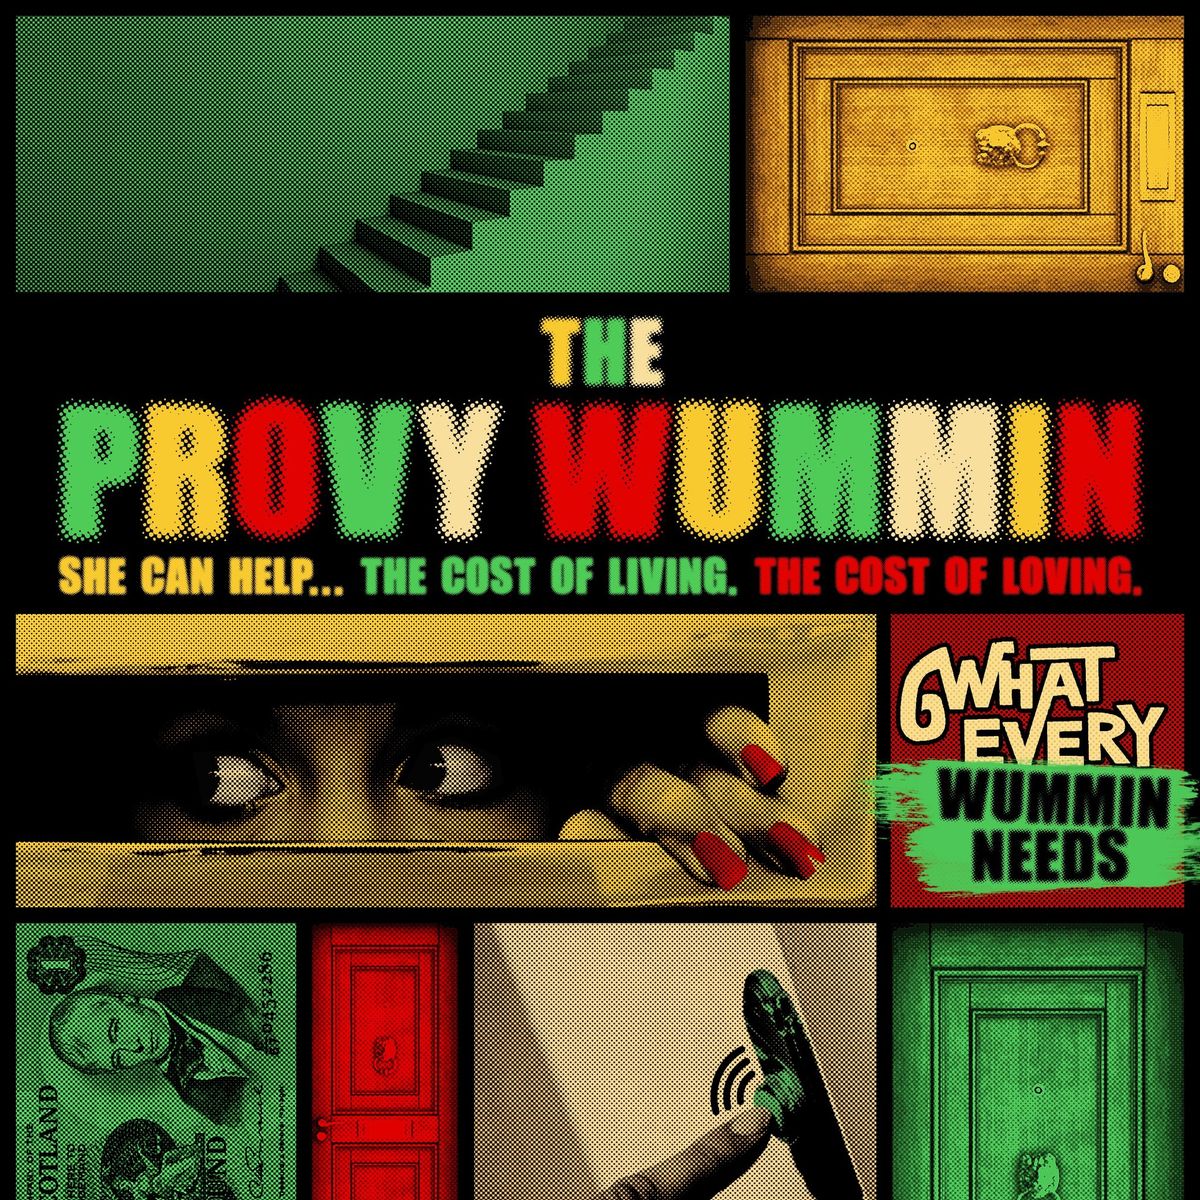 THE PROVY WUMMIN